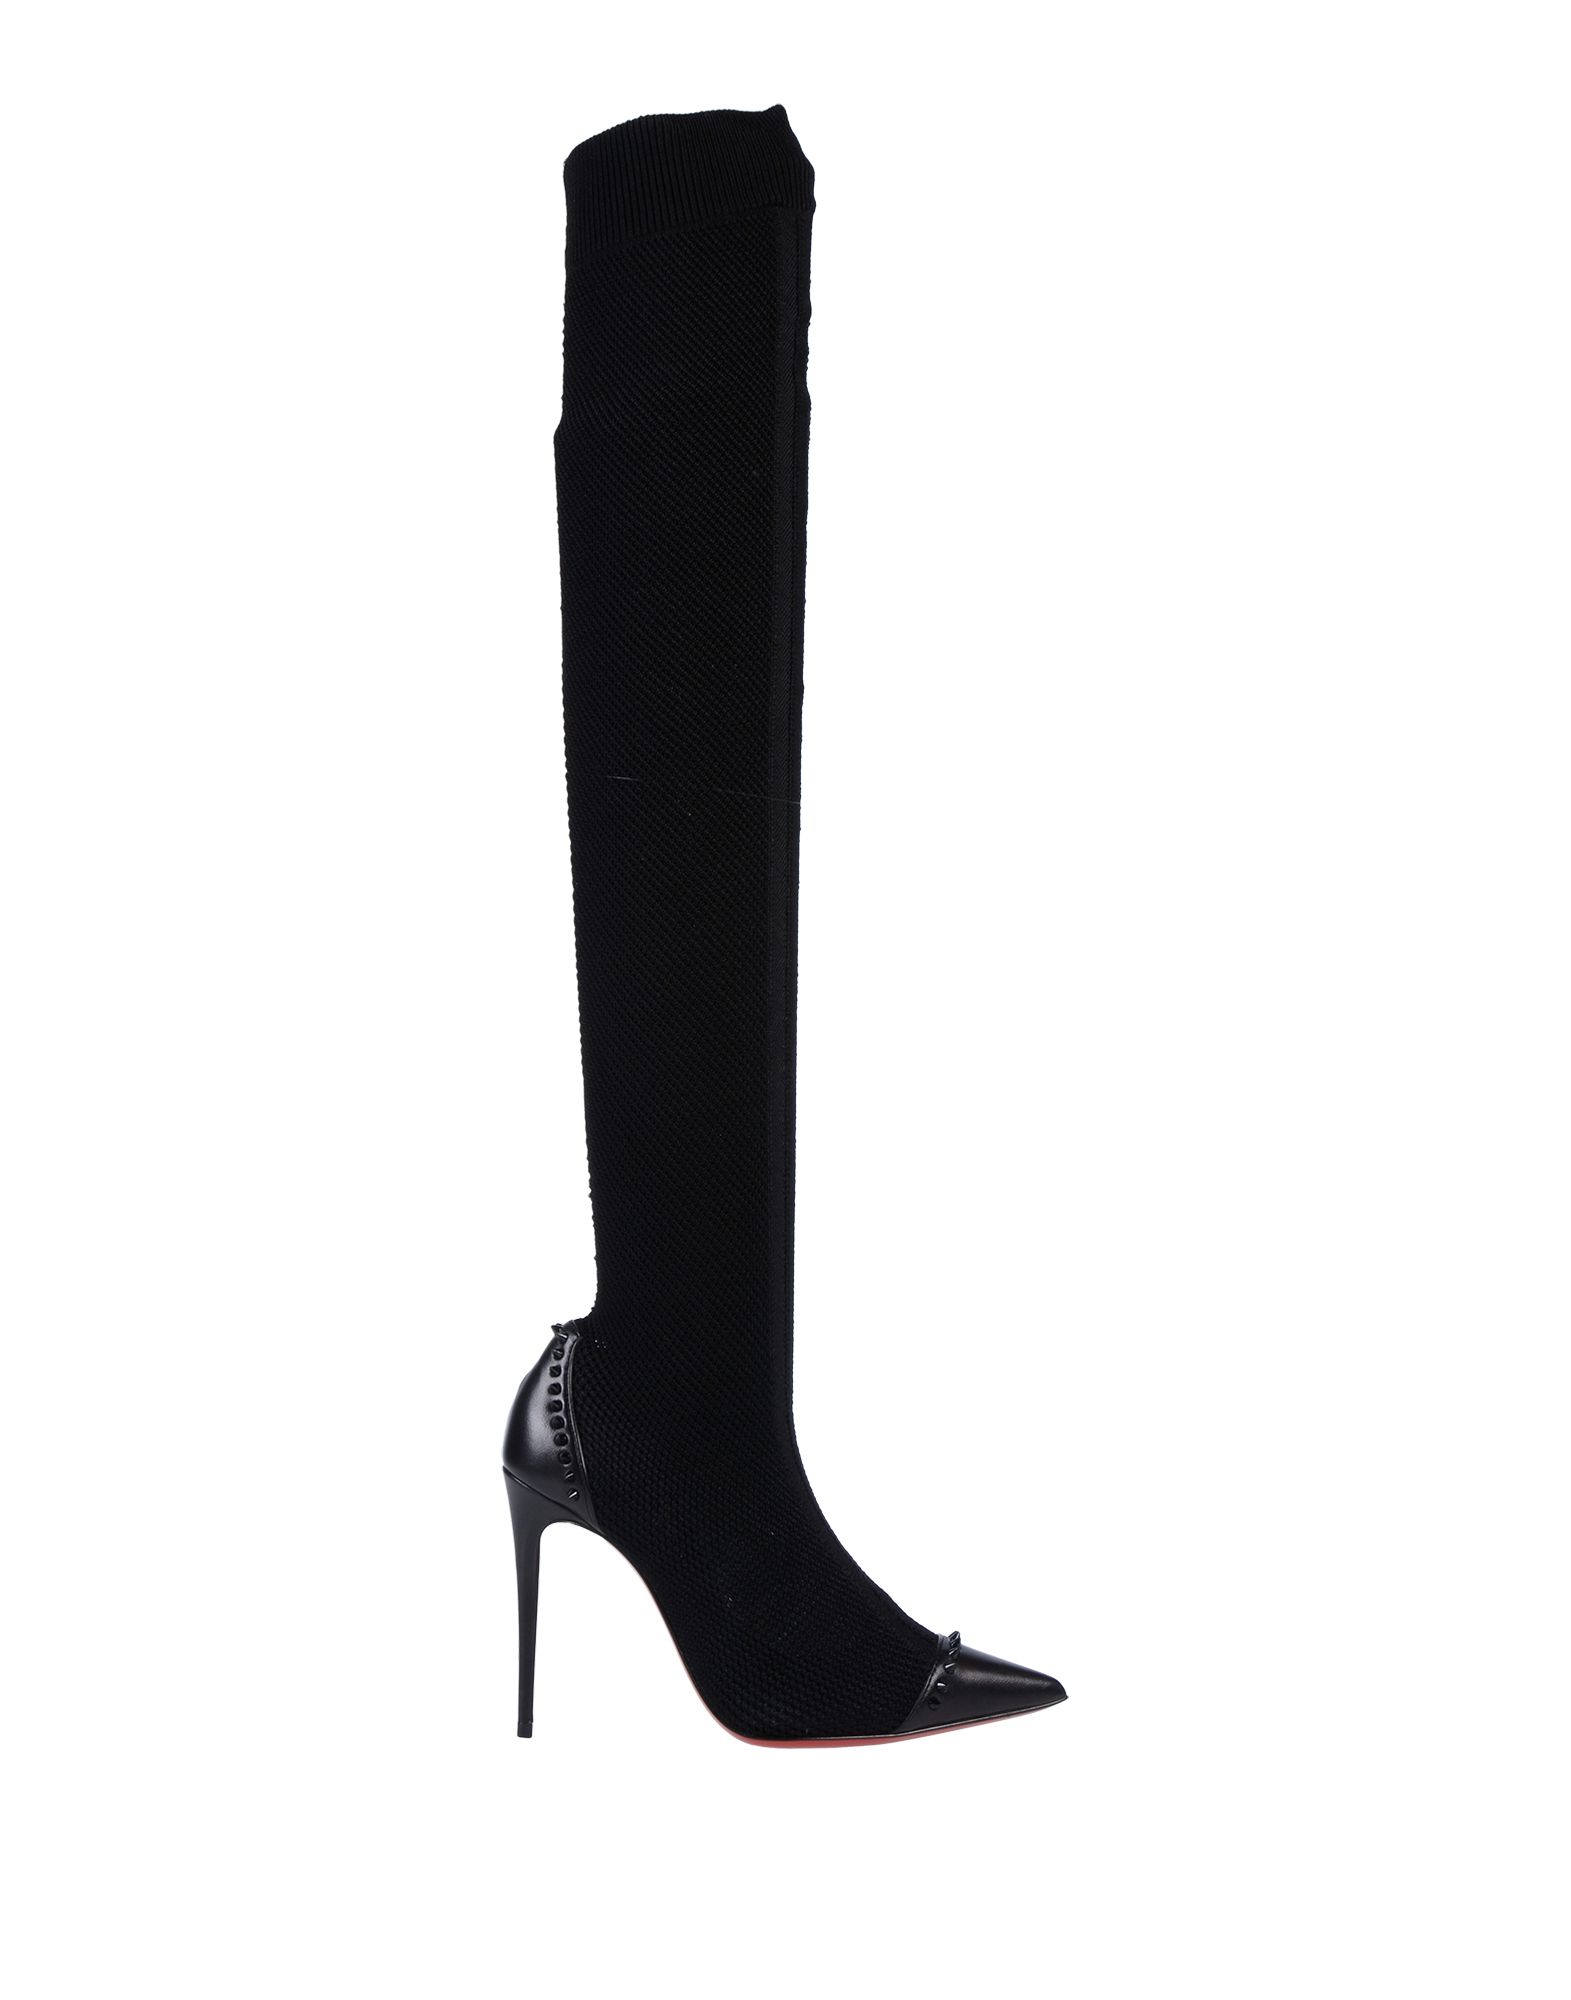 louboutin boots for women